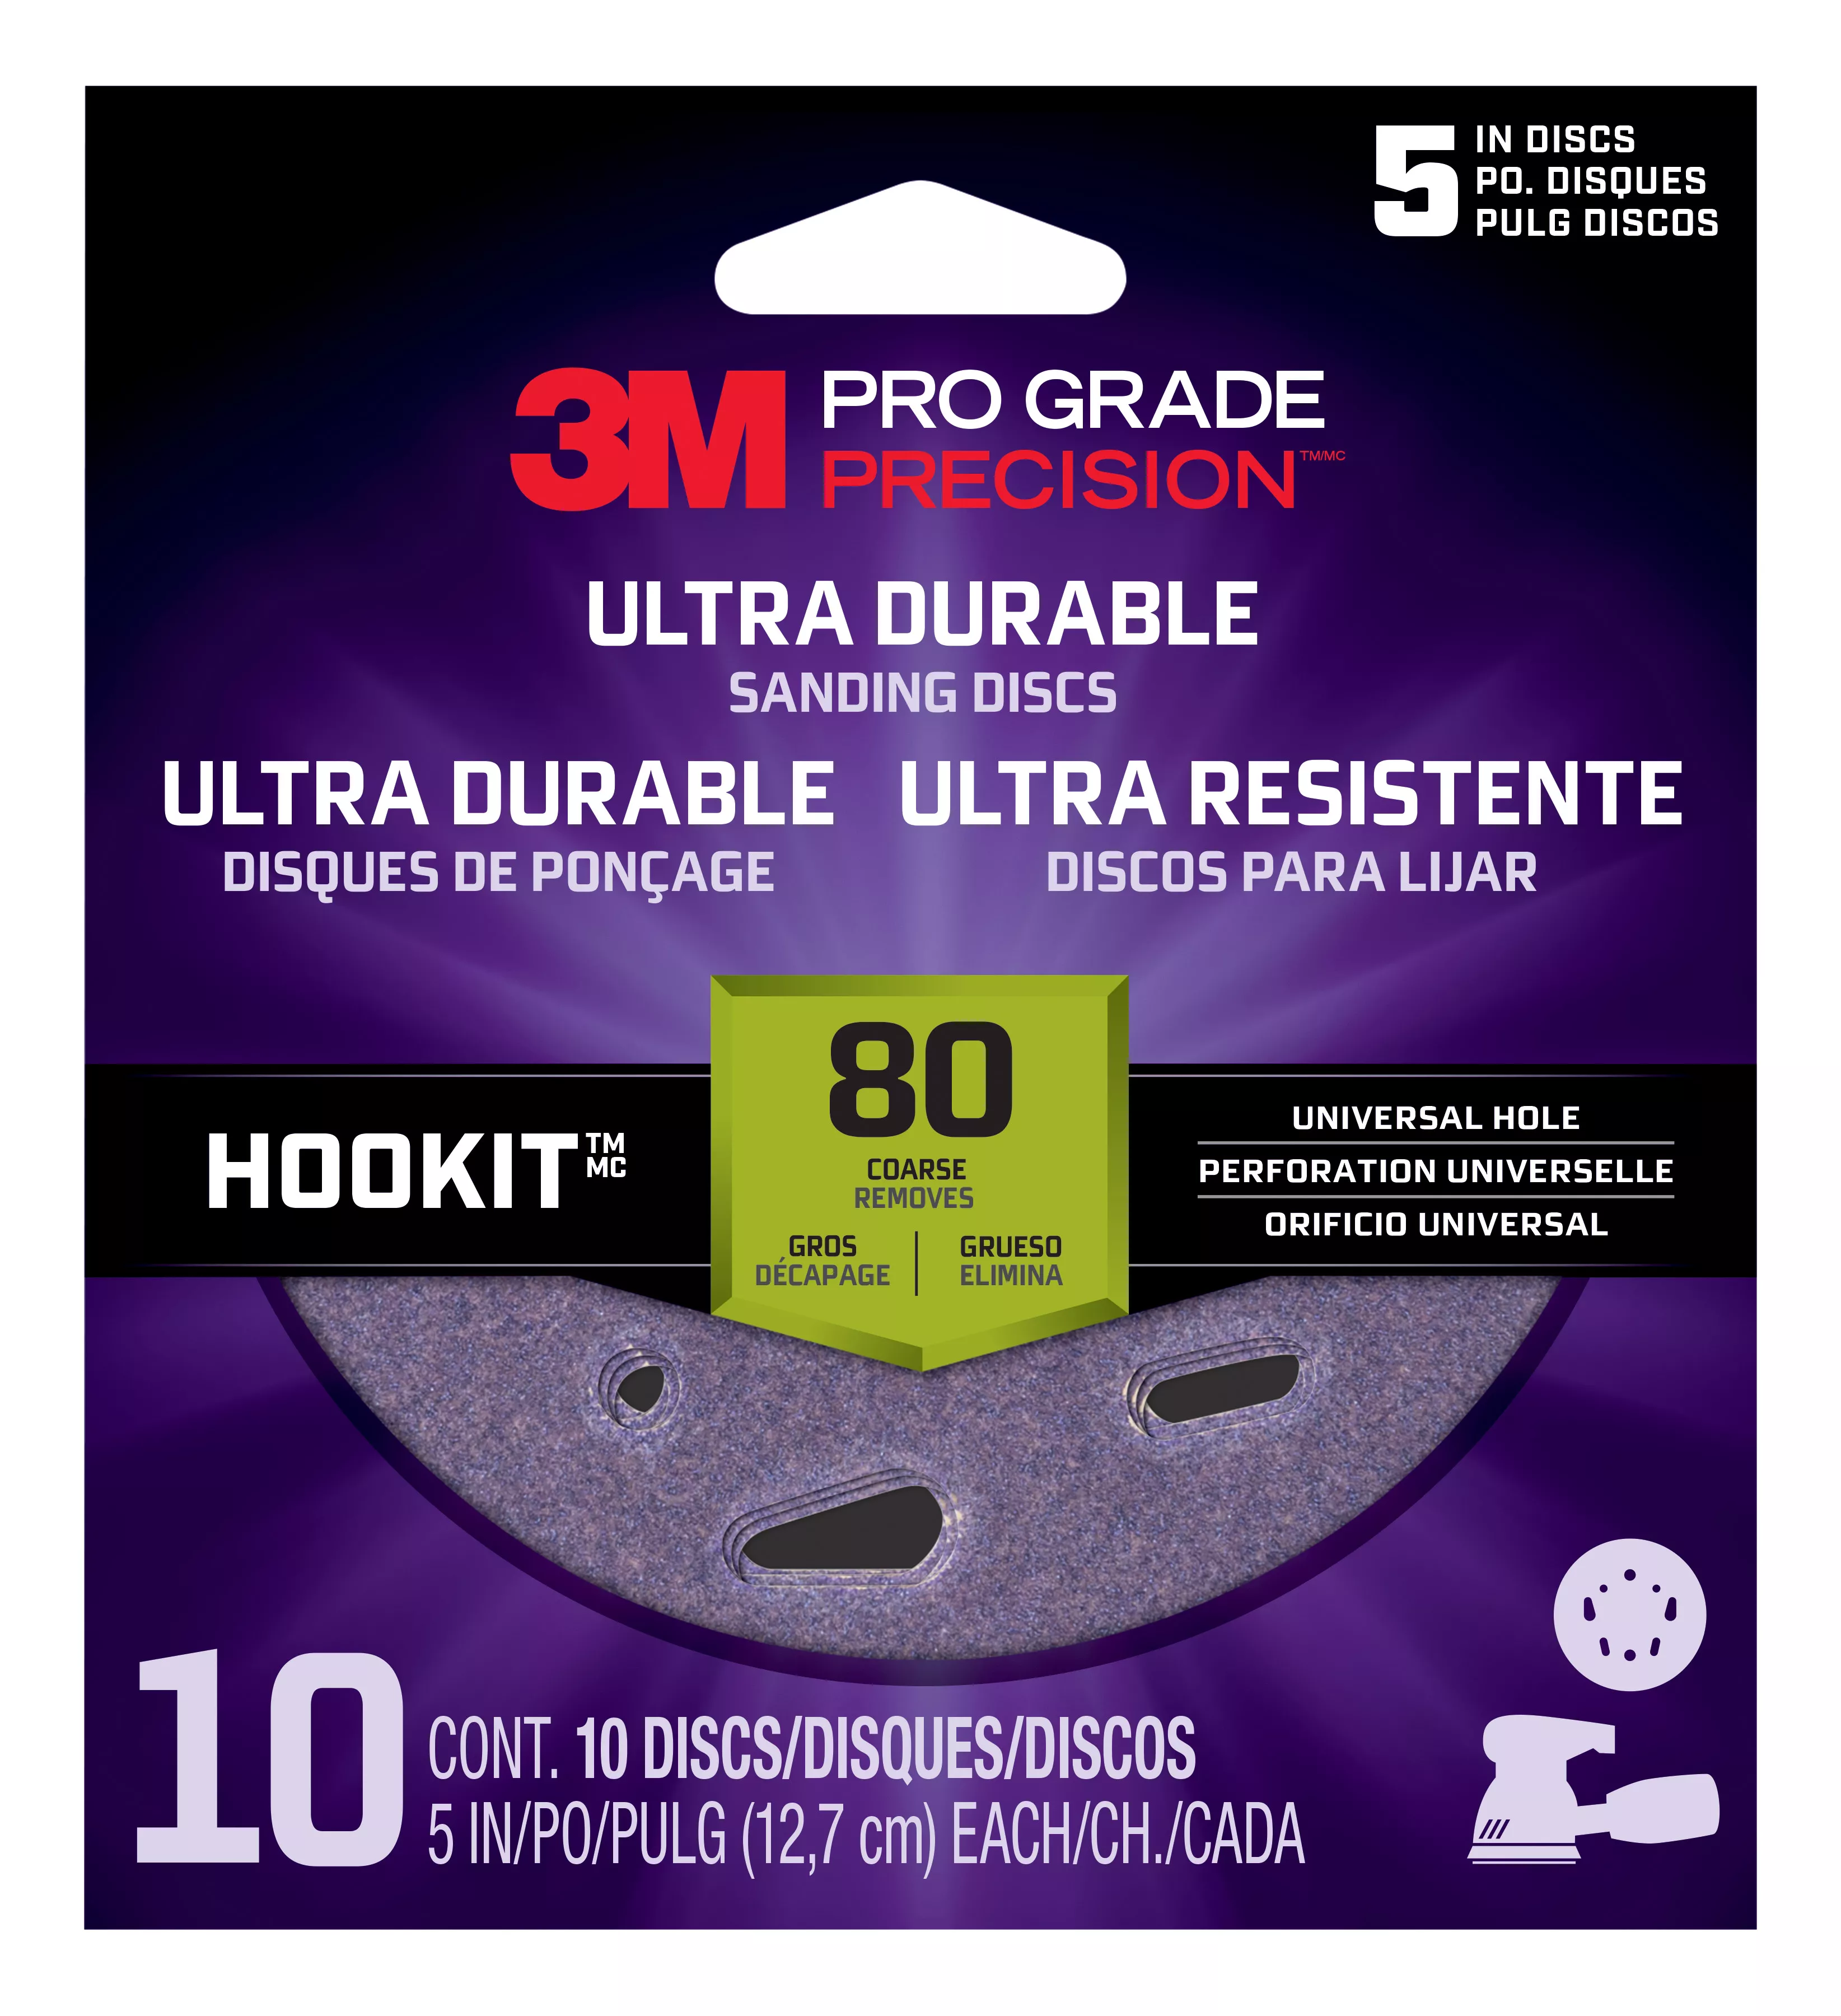 3M™ Pro Grade Precision™ Ultra Durable Universal Hole Sanding Disc
DUH580TRI-10I, 5 inch UH, 80, 10/pack